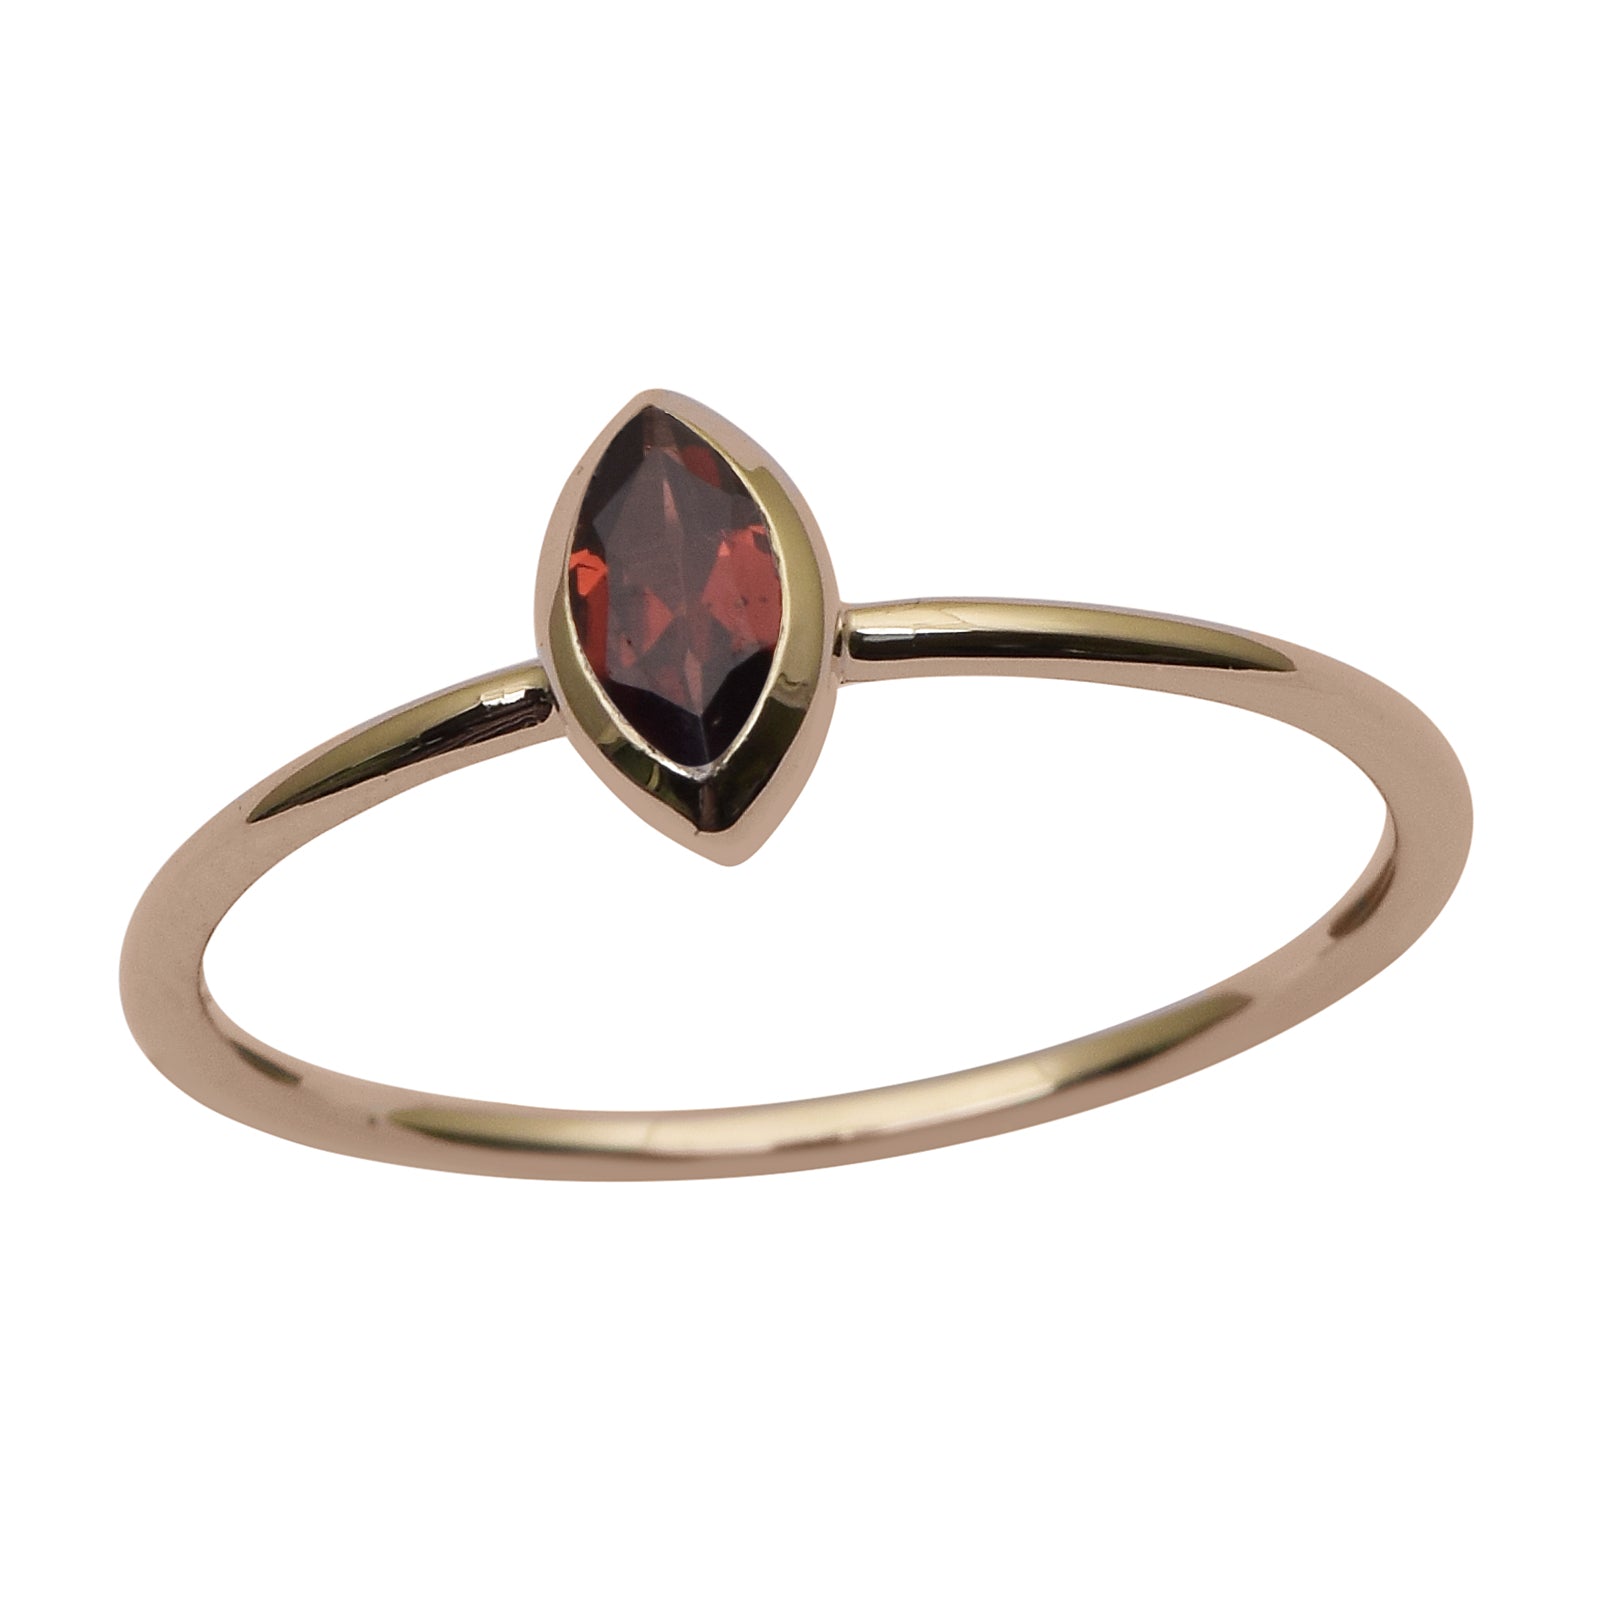 Vintage 14K Gold Cabochon Red Garnet Ring, Anniversary Ring, Bridal Wedding  Ring, Solid Gold Ring, Delicate Ring, Unique Rare Gold Jewelry. - Etsy